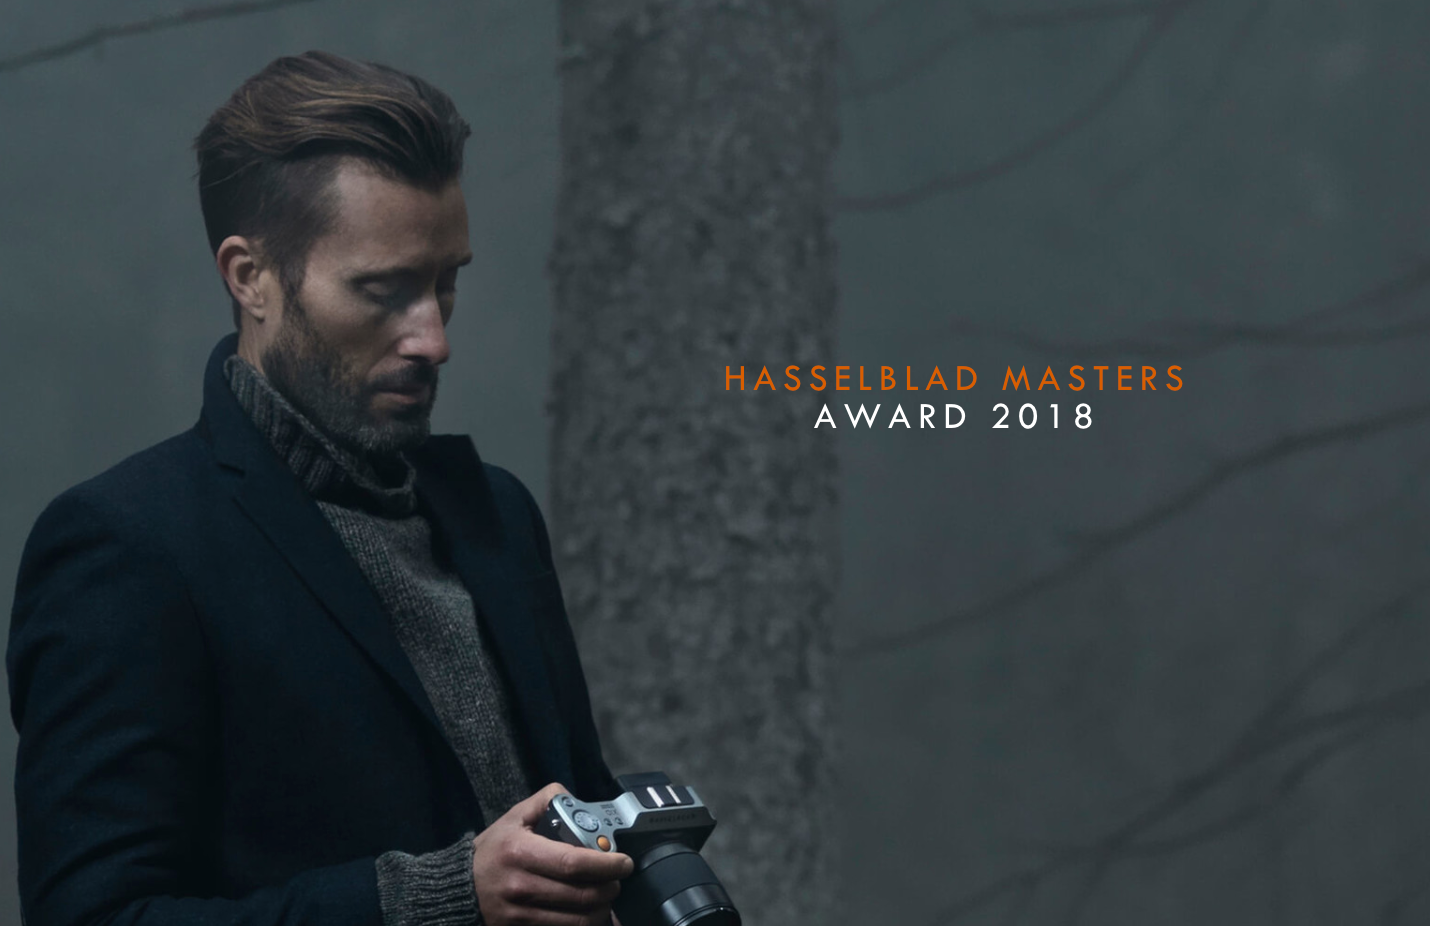 Hasselblad Masters Awards 2018